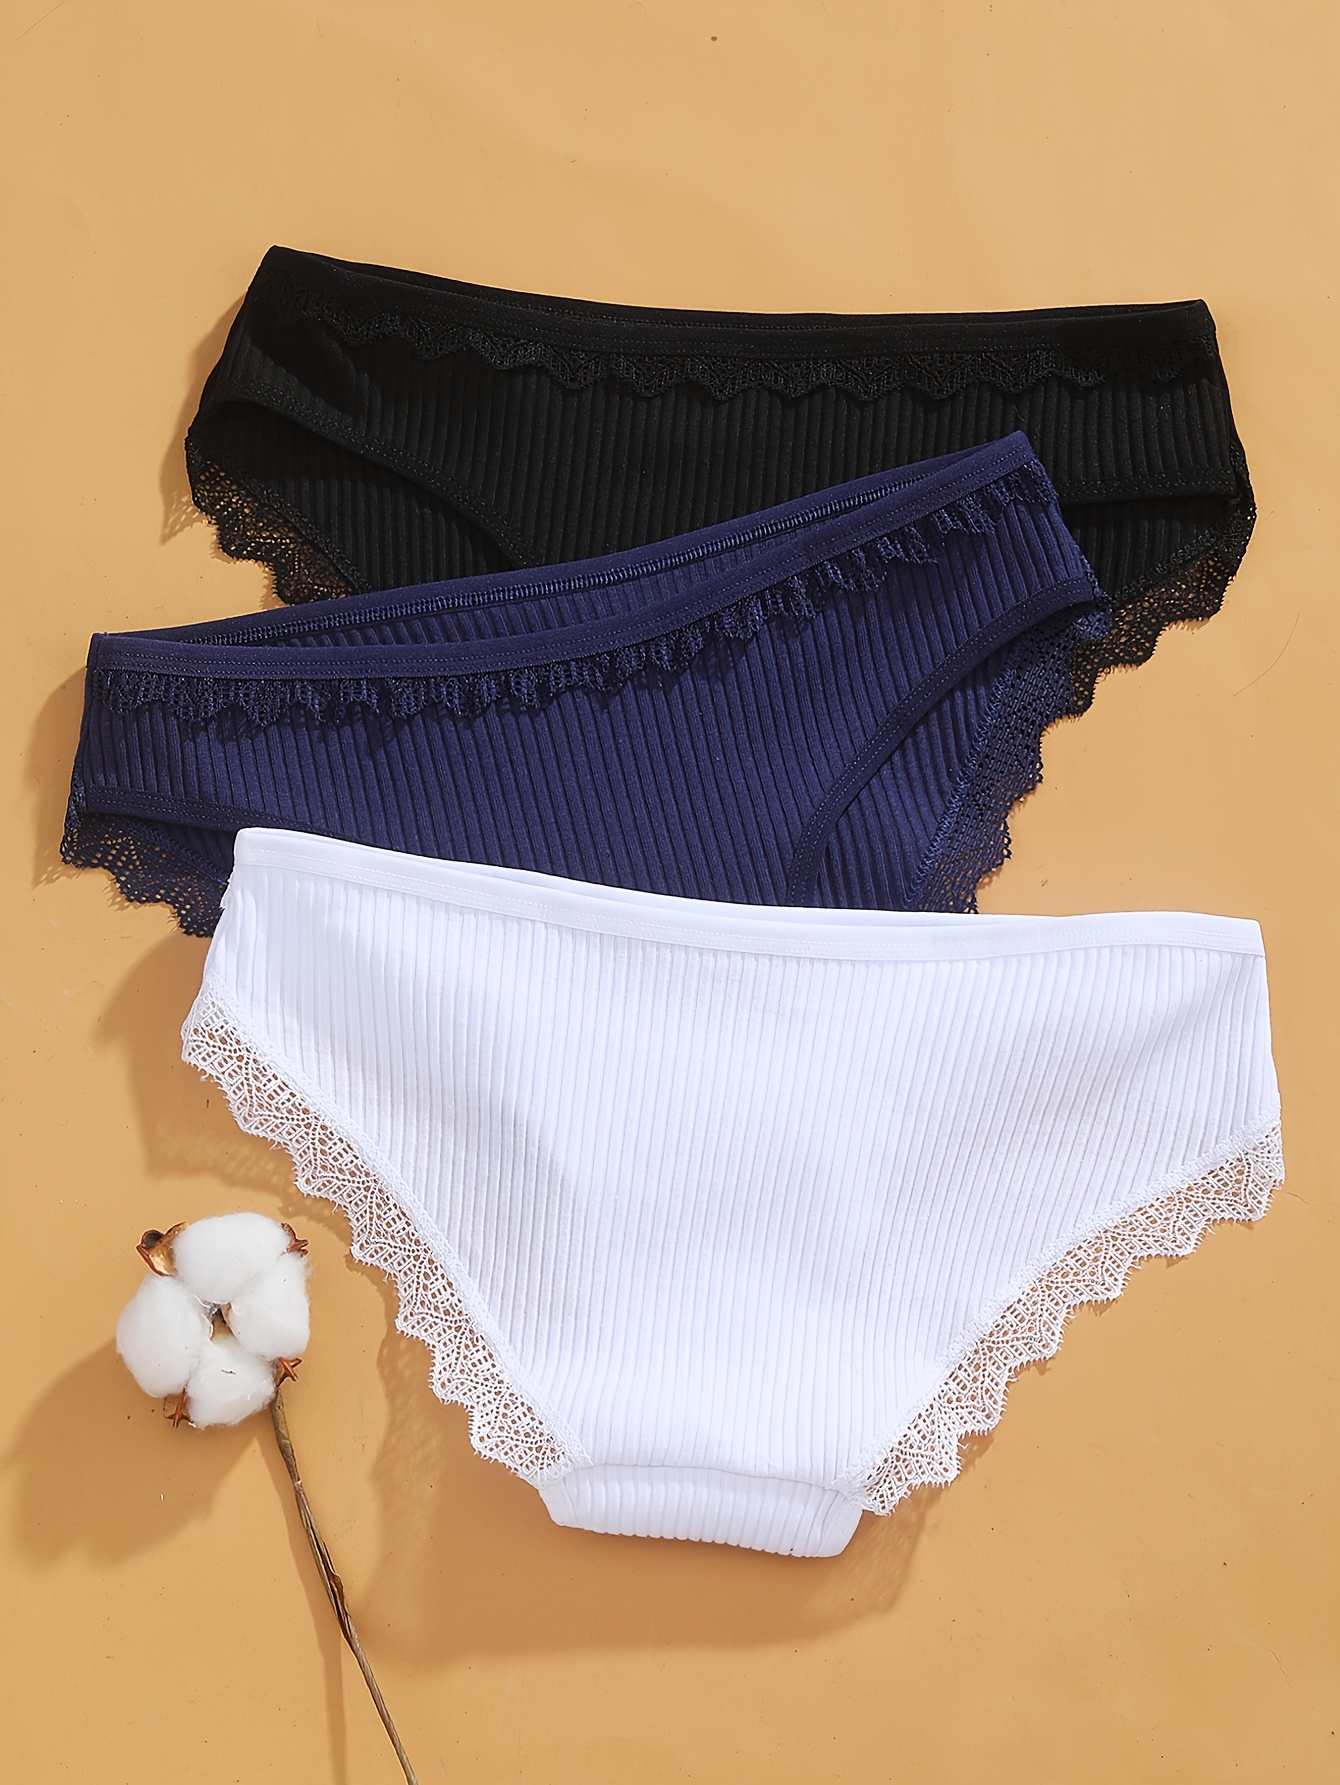 Wholesale Cute Panties for Teens Cotton, Lace, Seamless, Shaping 